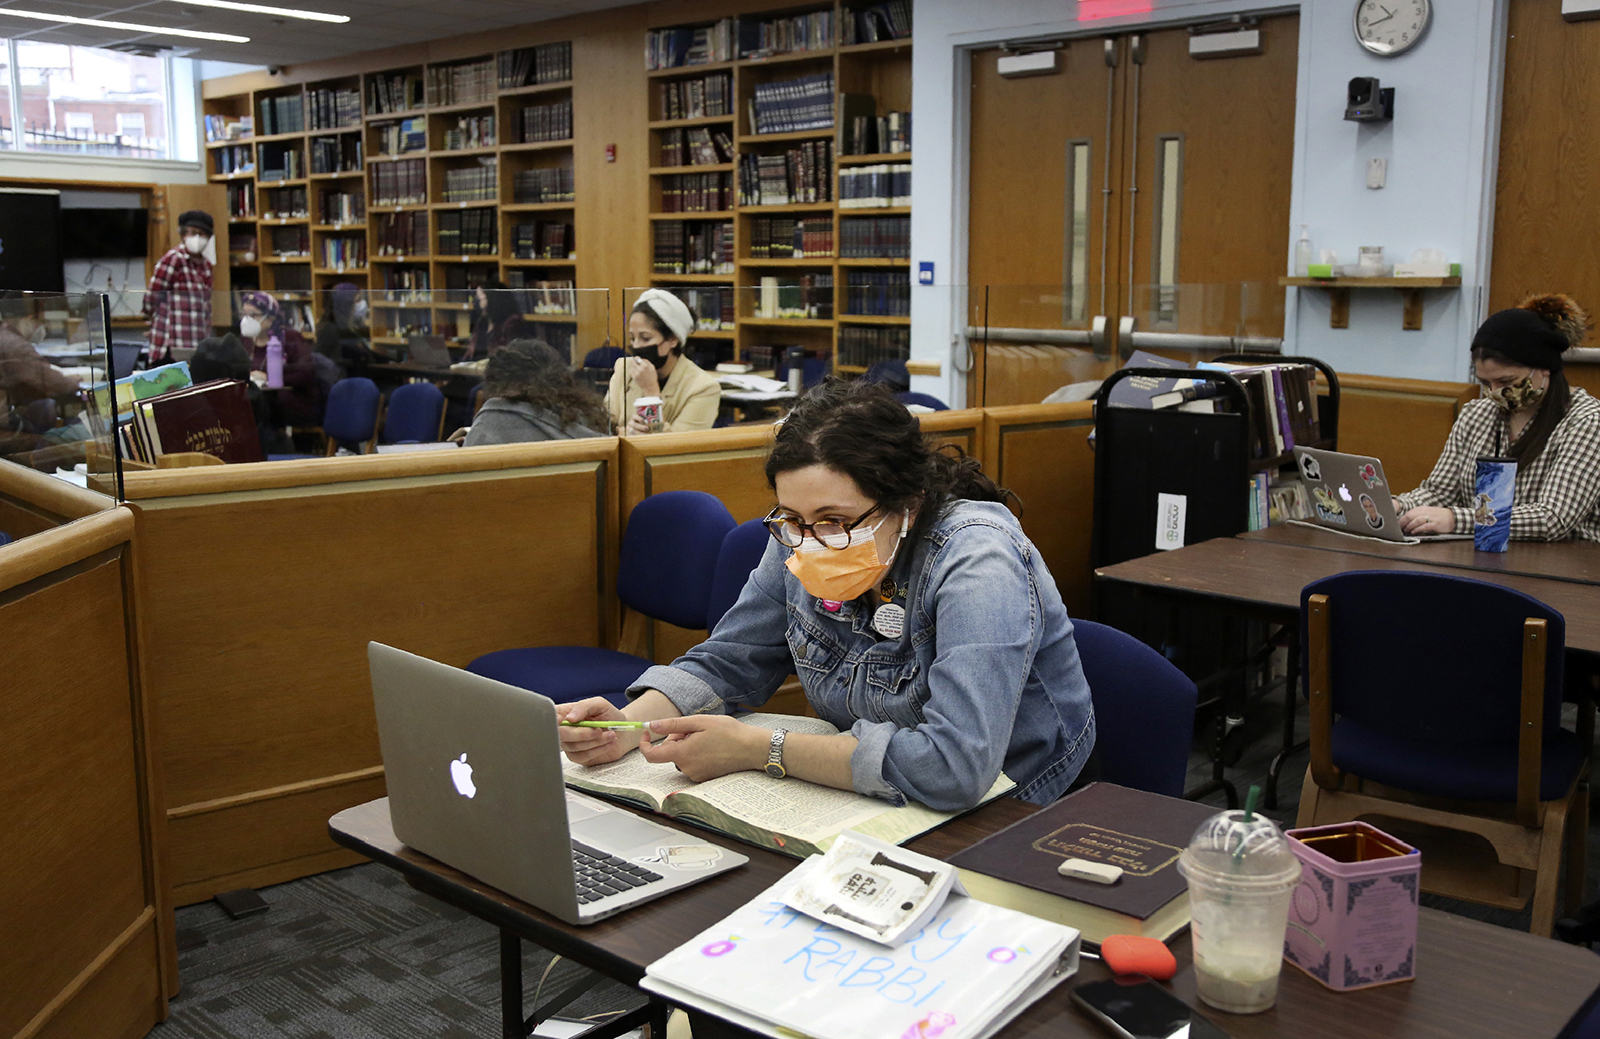 Naima Hirsch, an ordination program student, studies in the beit midrash, a space for learning, at Yeshivat Maharat in the Bronx borough of New York, on Wednesday, Dec. 8, 2021. Yeshivat Maharat is the only U.S. seminary that ordains Orthodox Jewish women. (AP Photo/Jessie Wardarski)